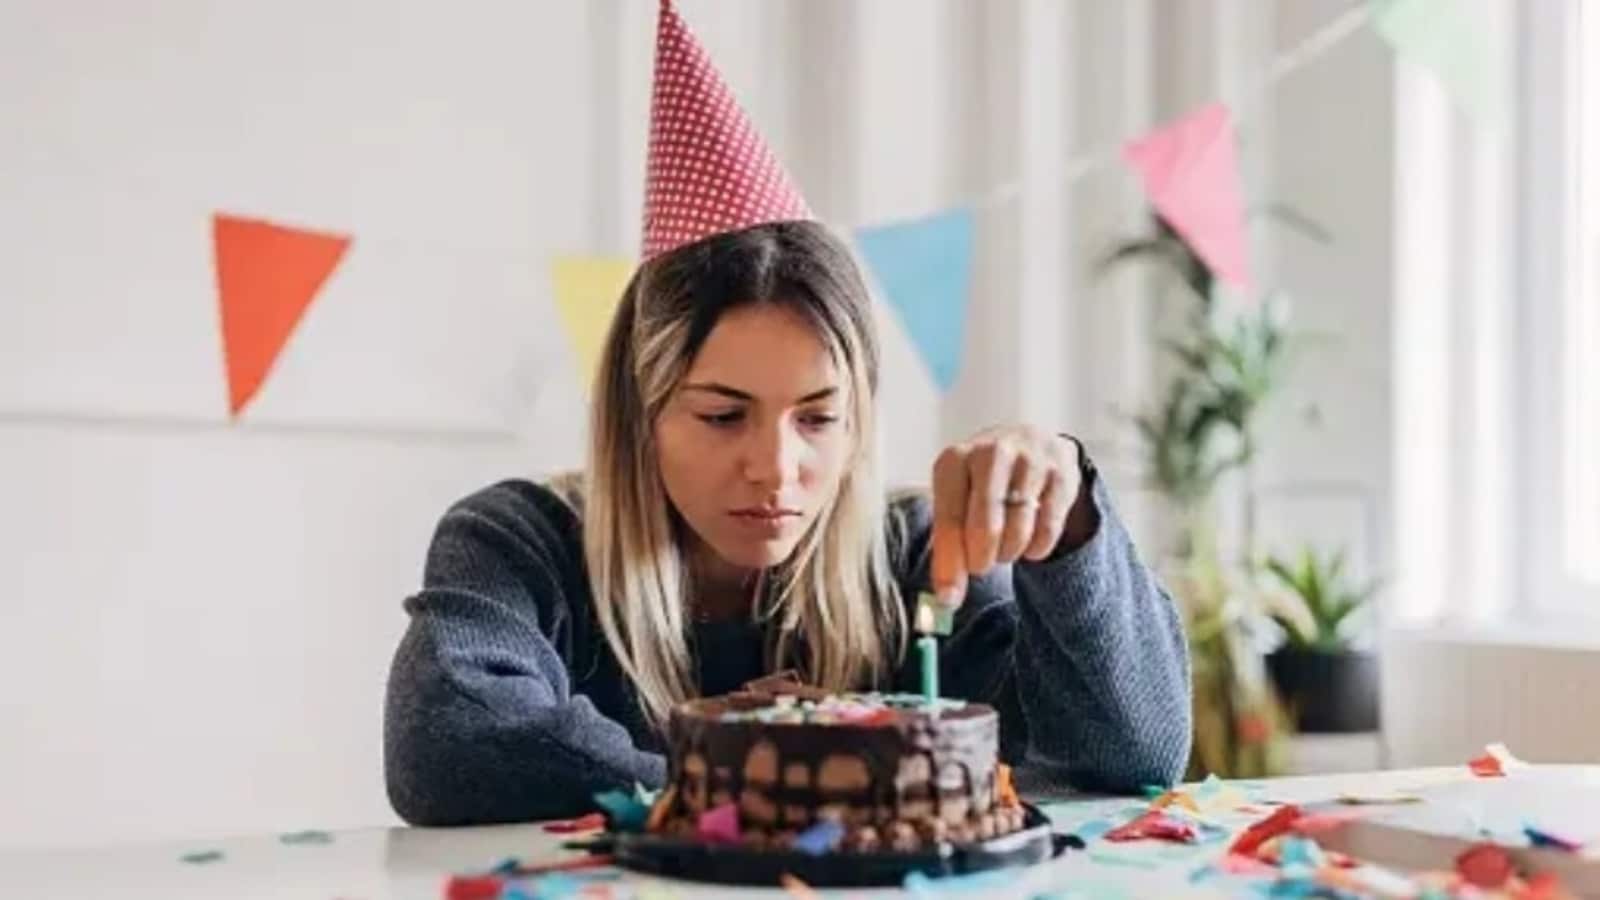 Suffering from birthday blues? Here's why it happens